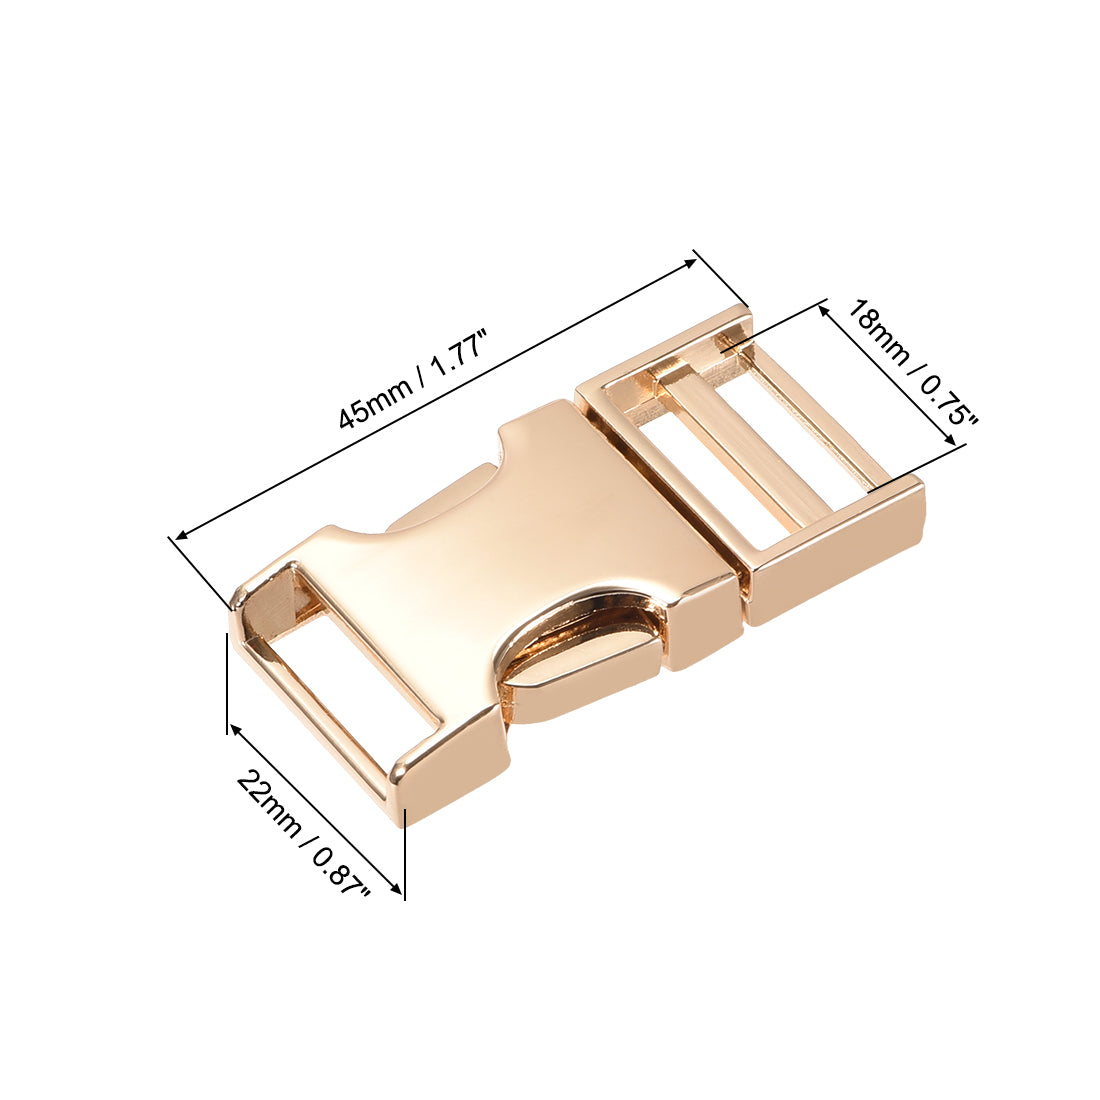 Uxcell Uxcell Side Release Buckle 1.2-inch Zinc Alloy Adjustable Buckle Gold Tone